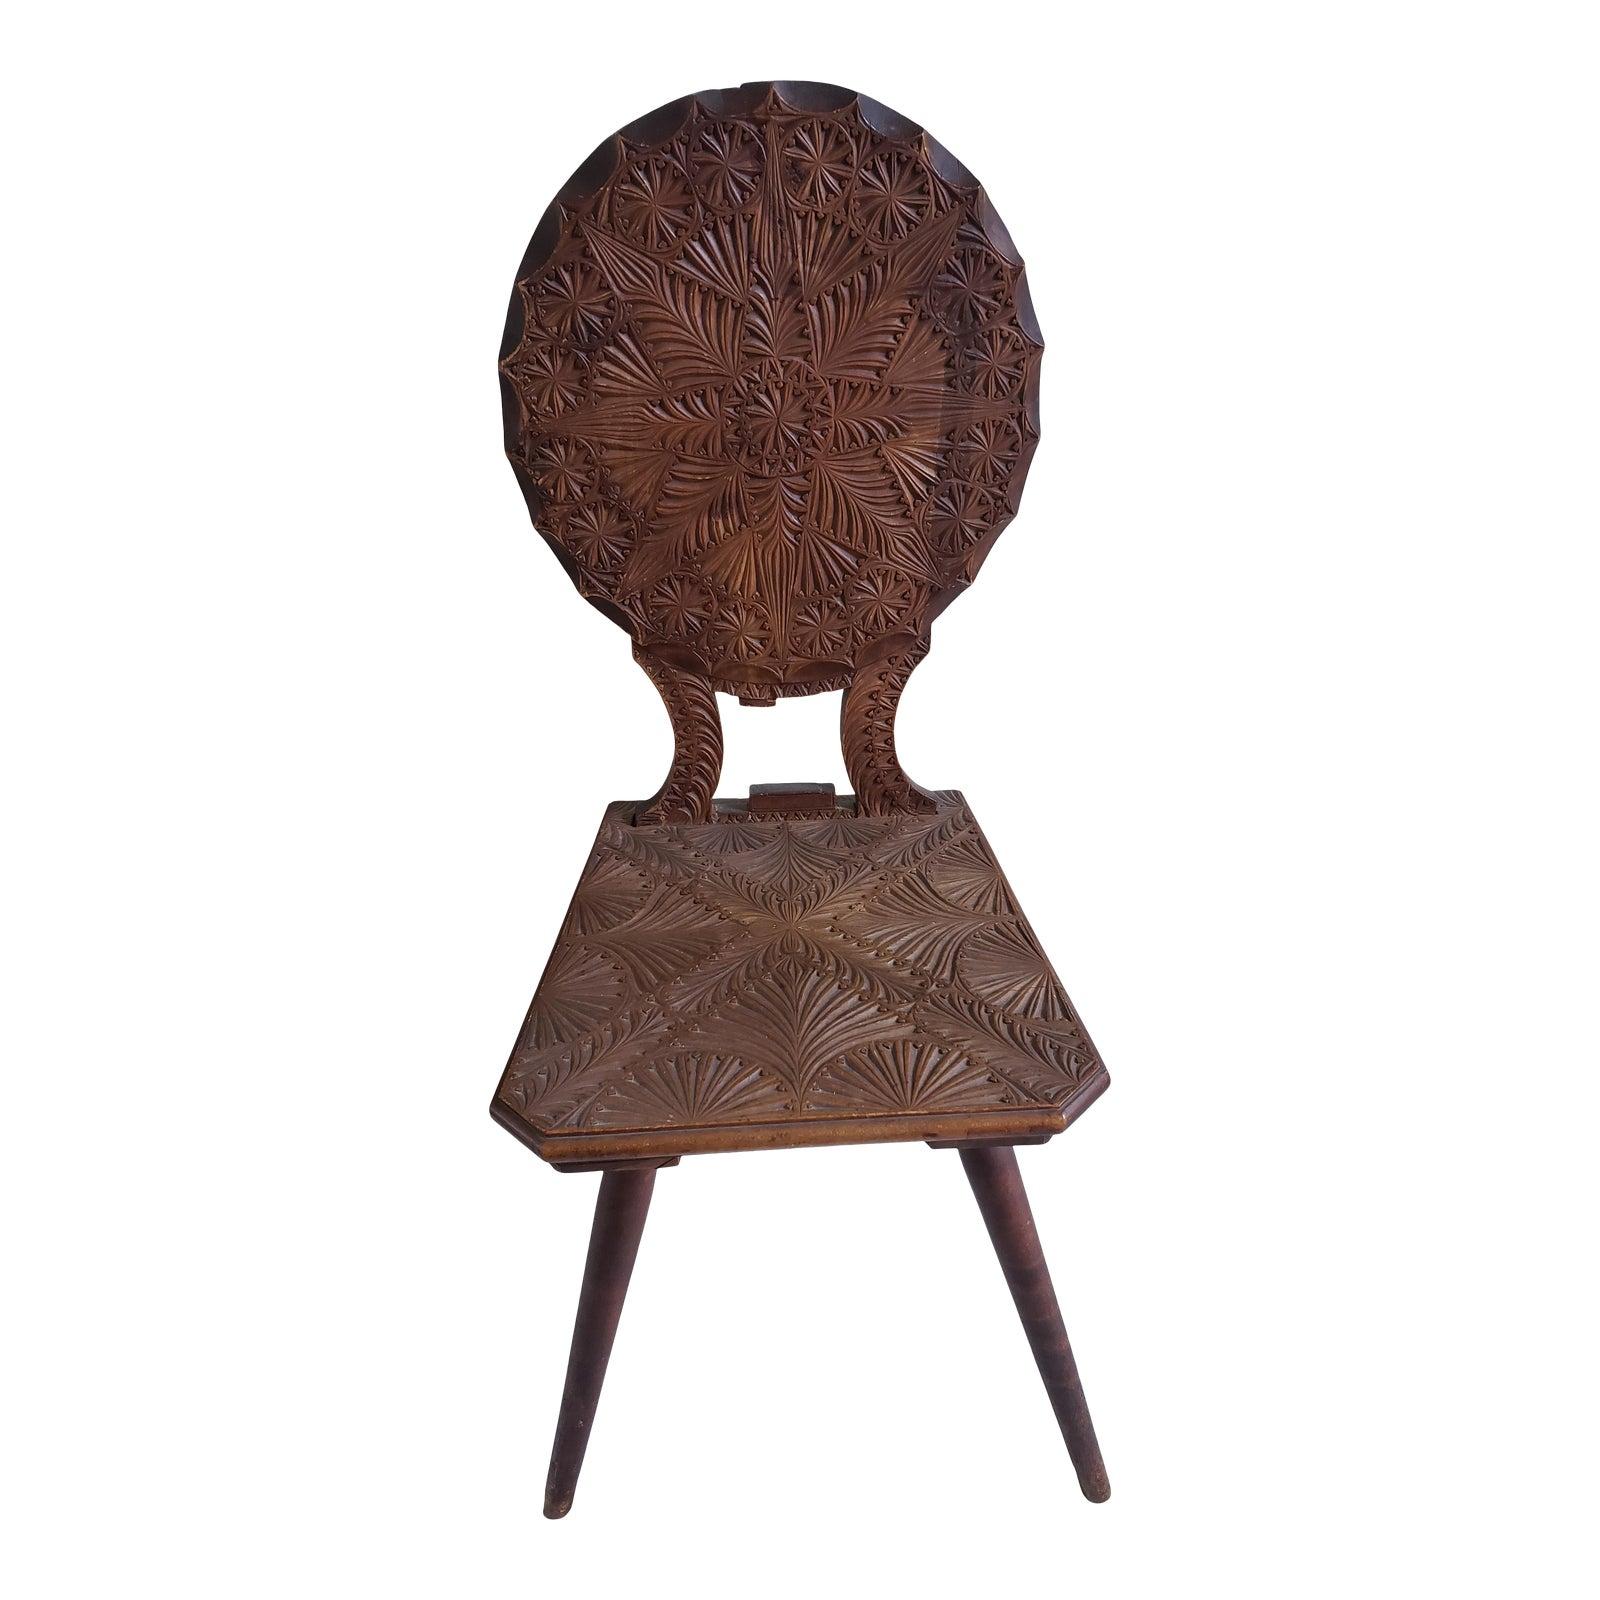 Early 20th Century Antique Carved Wood Chair